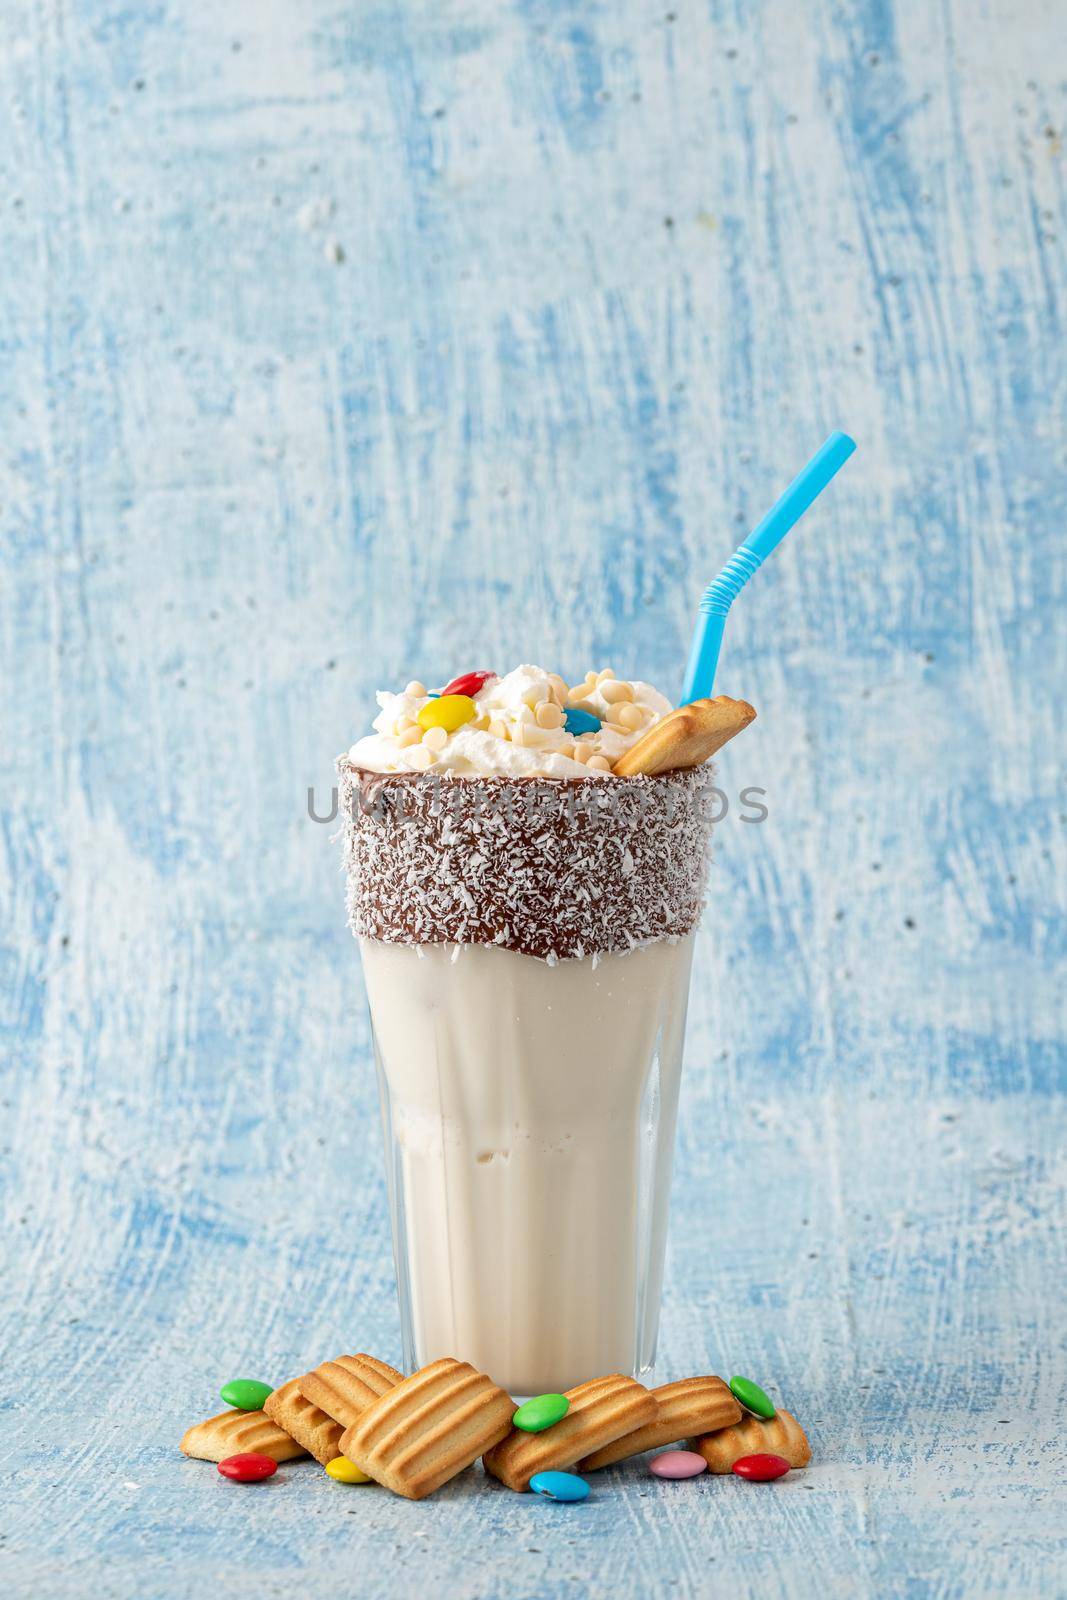 Milkshake with milk and baby biscuit decorated with dragee sugar. by Sonat